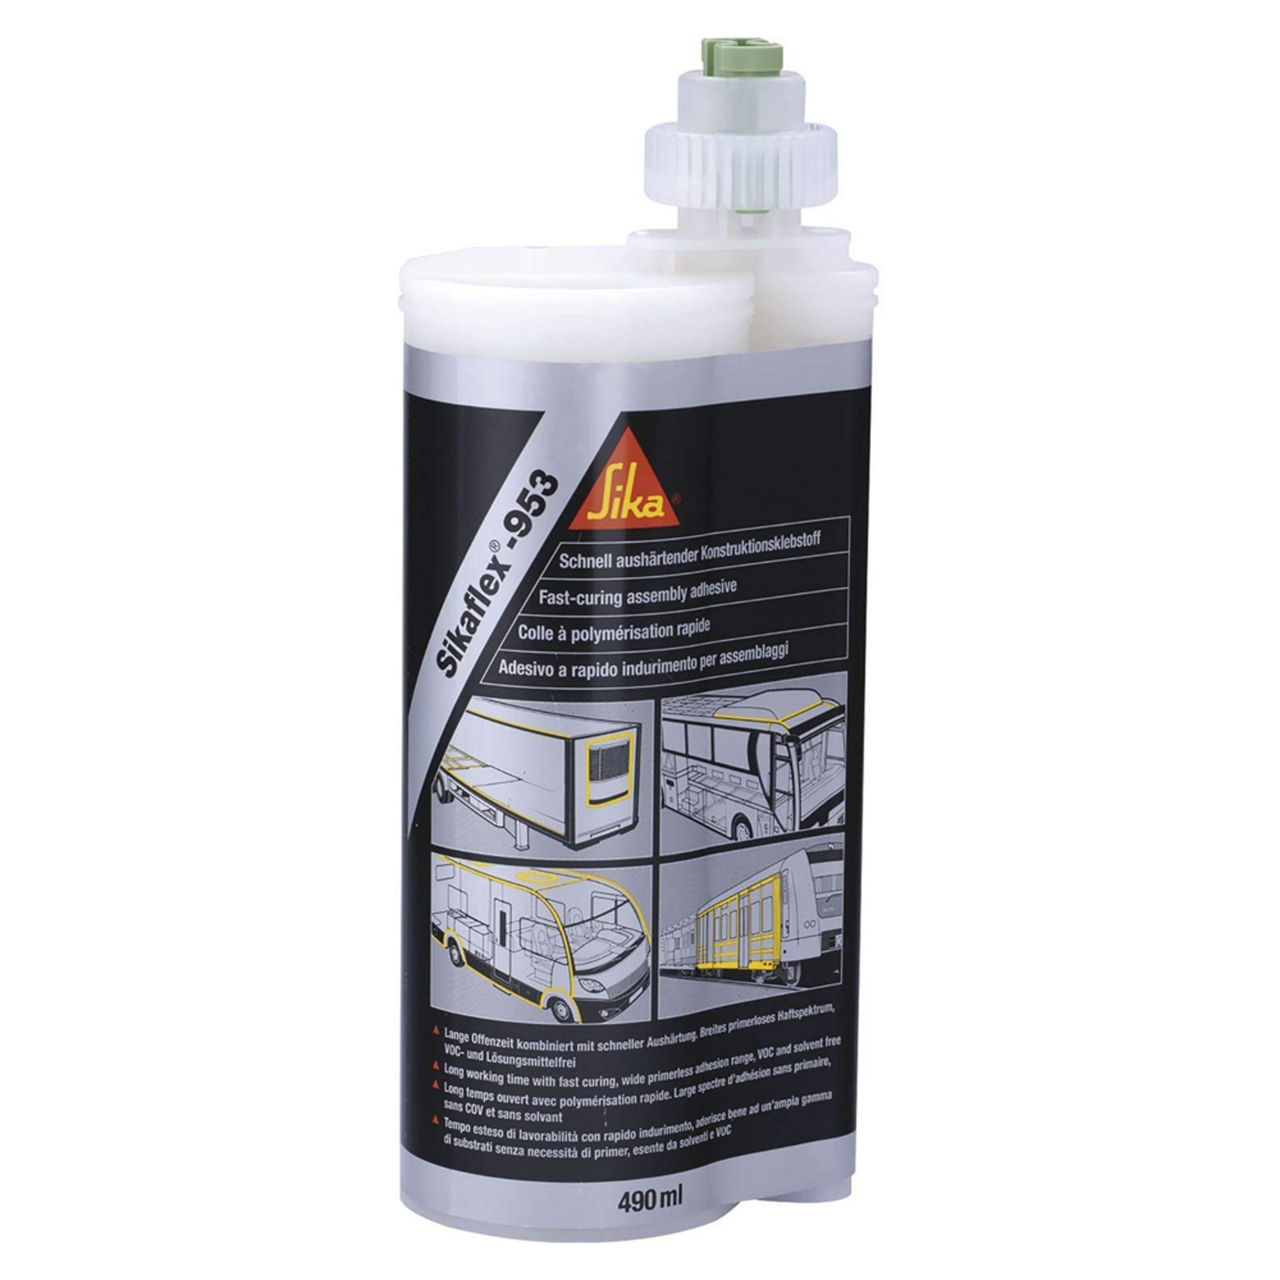 DIY Experts Sikaflex®-522 and Sikaflex®-554, Are you struggling to select  the right adhesive for your caravan DIY project? At Sika we keep thing  simple: Our two Experts for Vehicle Manufacturing